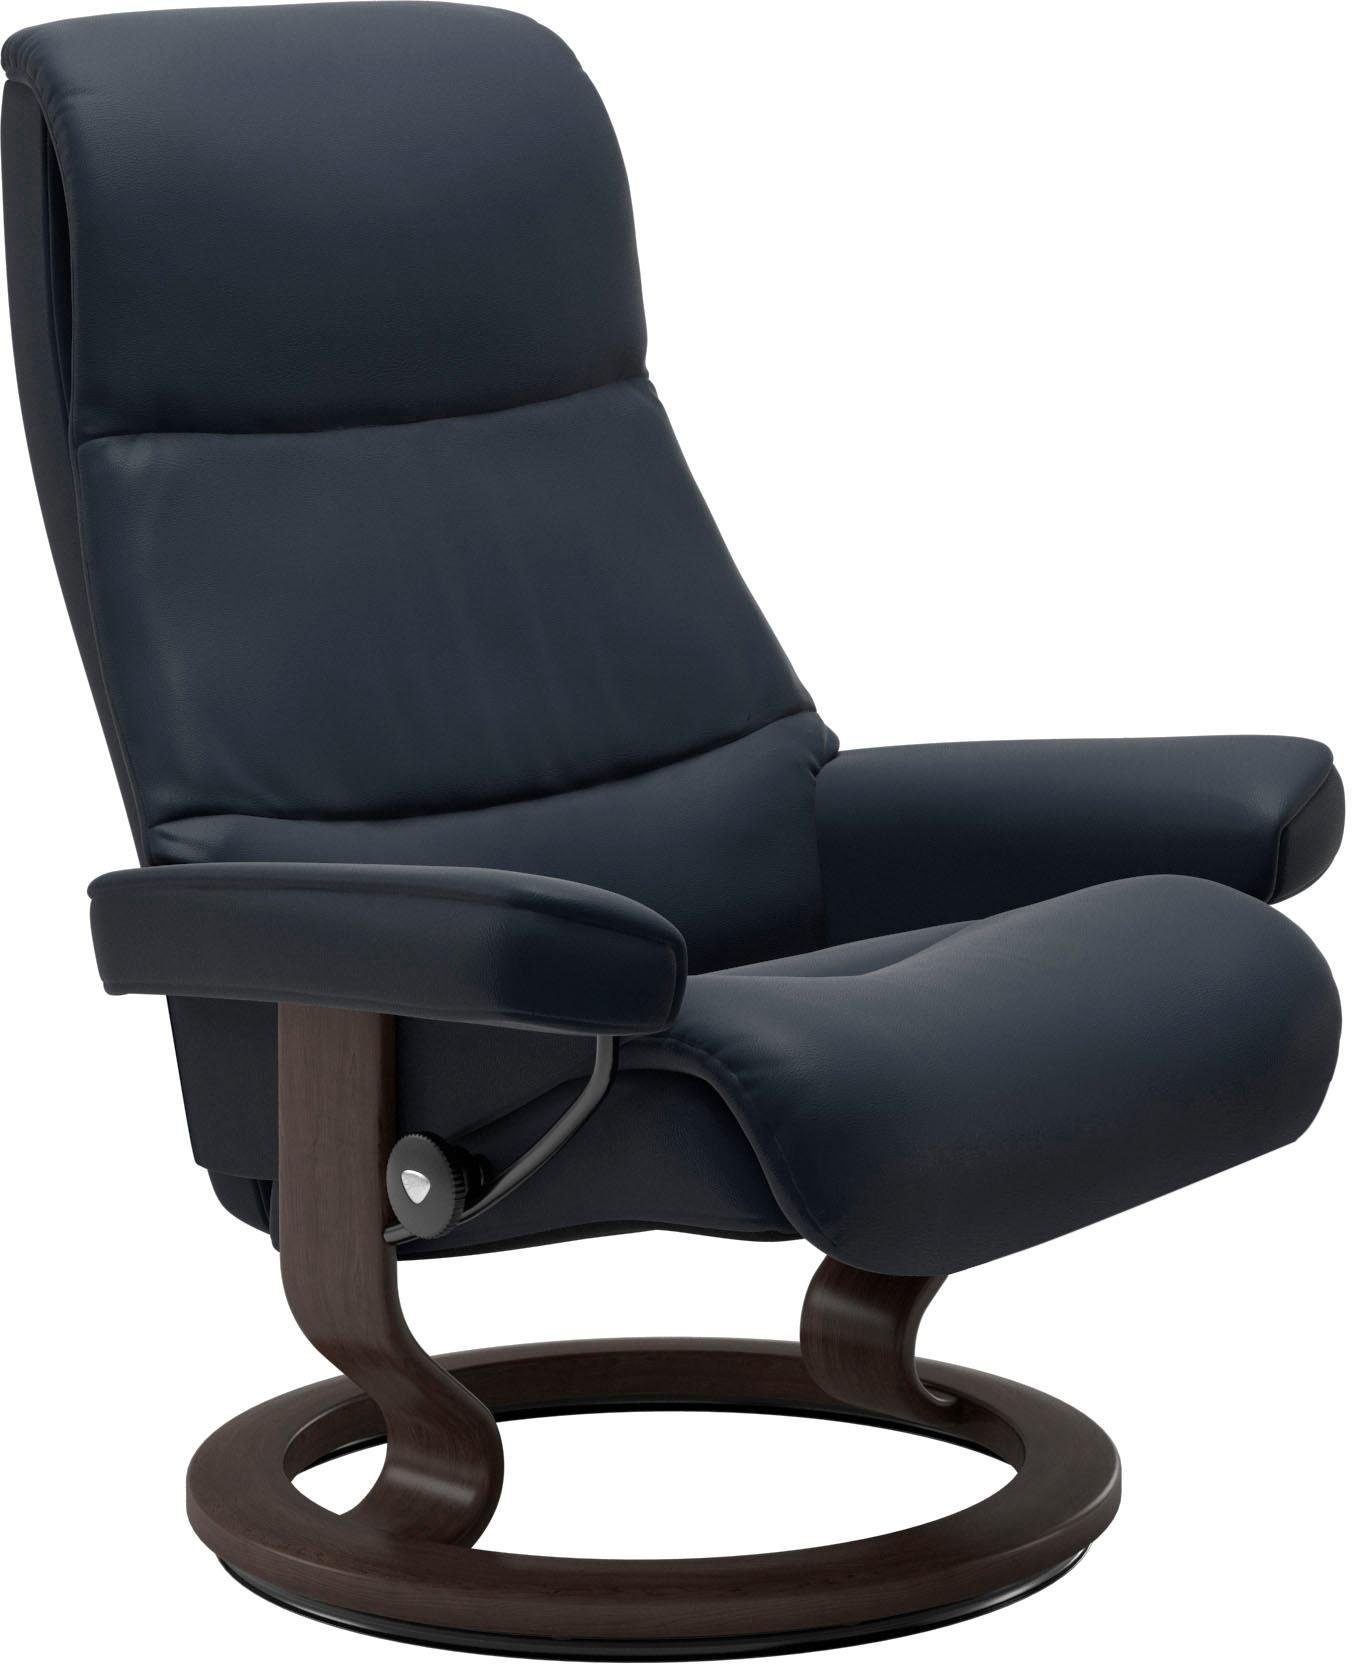 Stressless® Relaxsessel View, mit Classic S,Gestell Base, Wenge Größe